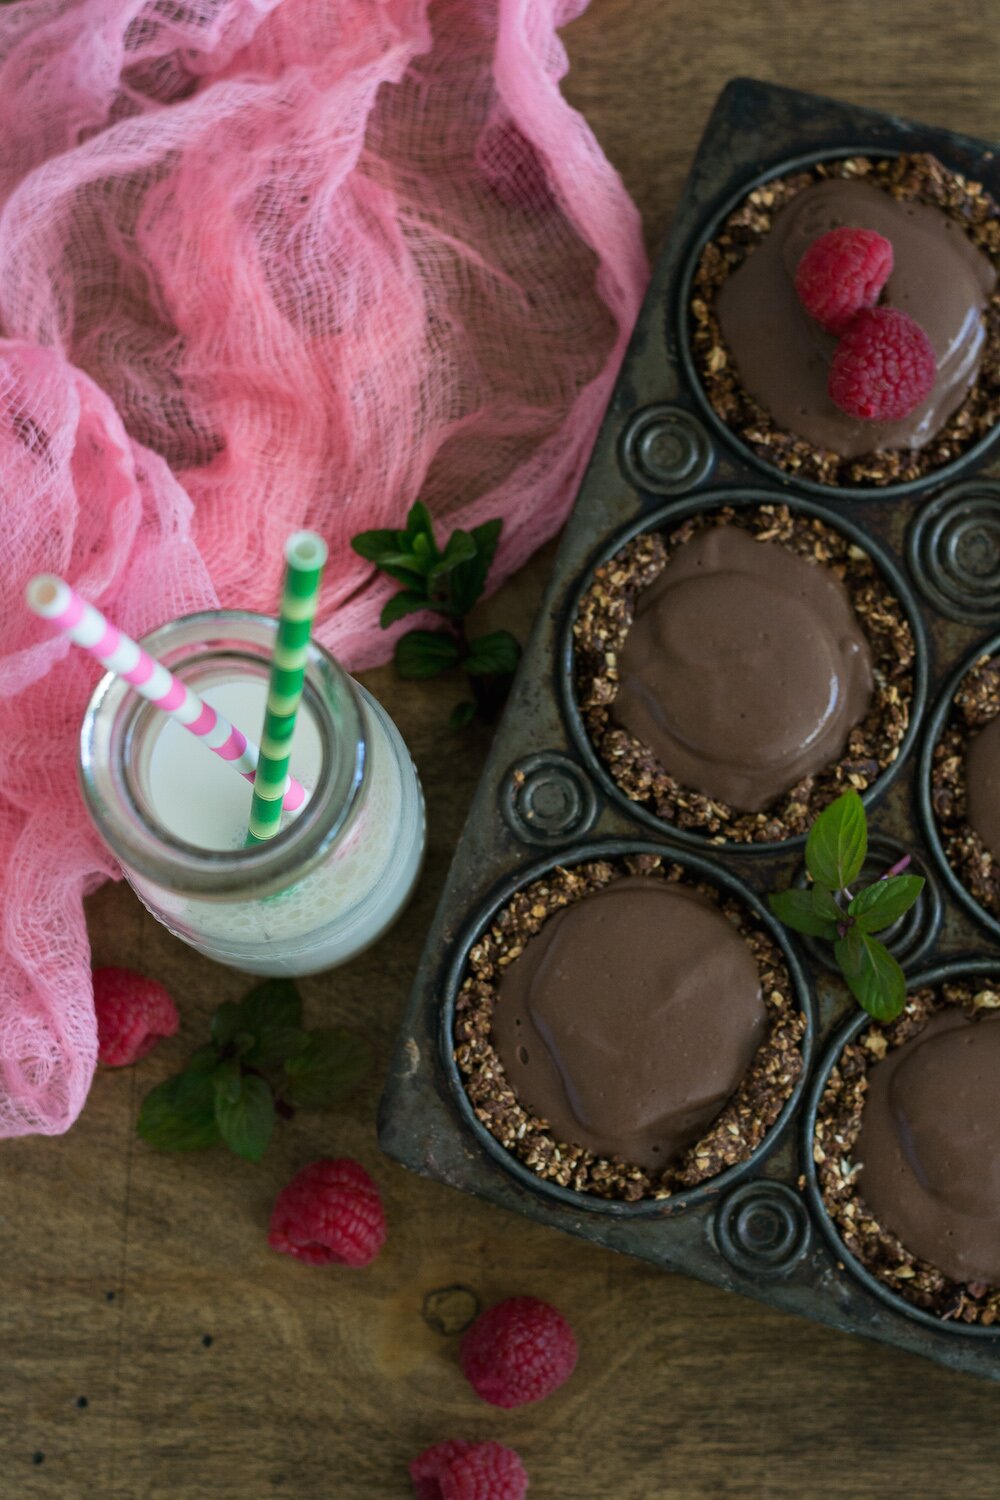 Sugar-free Mini Chocolate Mint Pudding Pies by An Unrefined Vegan